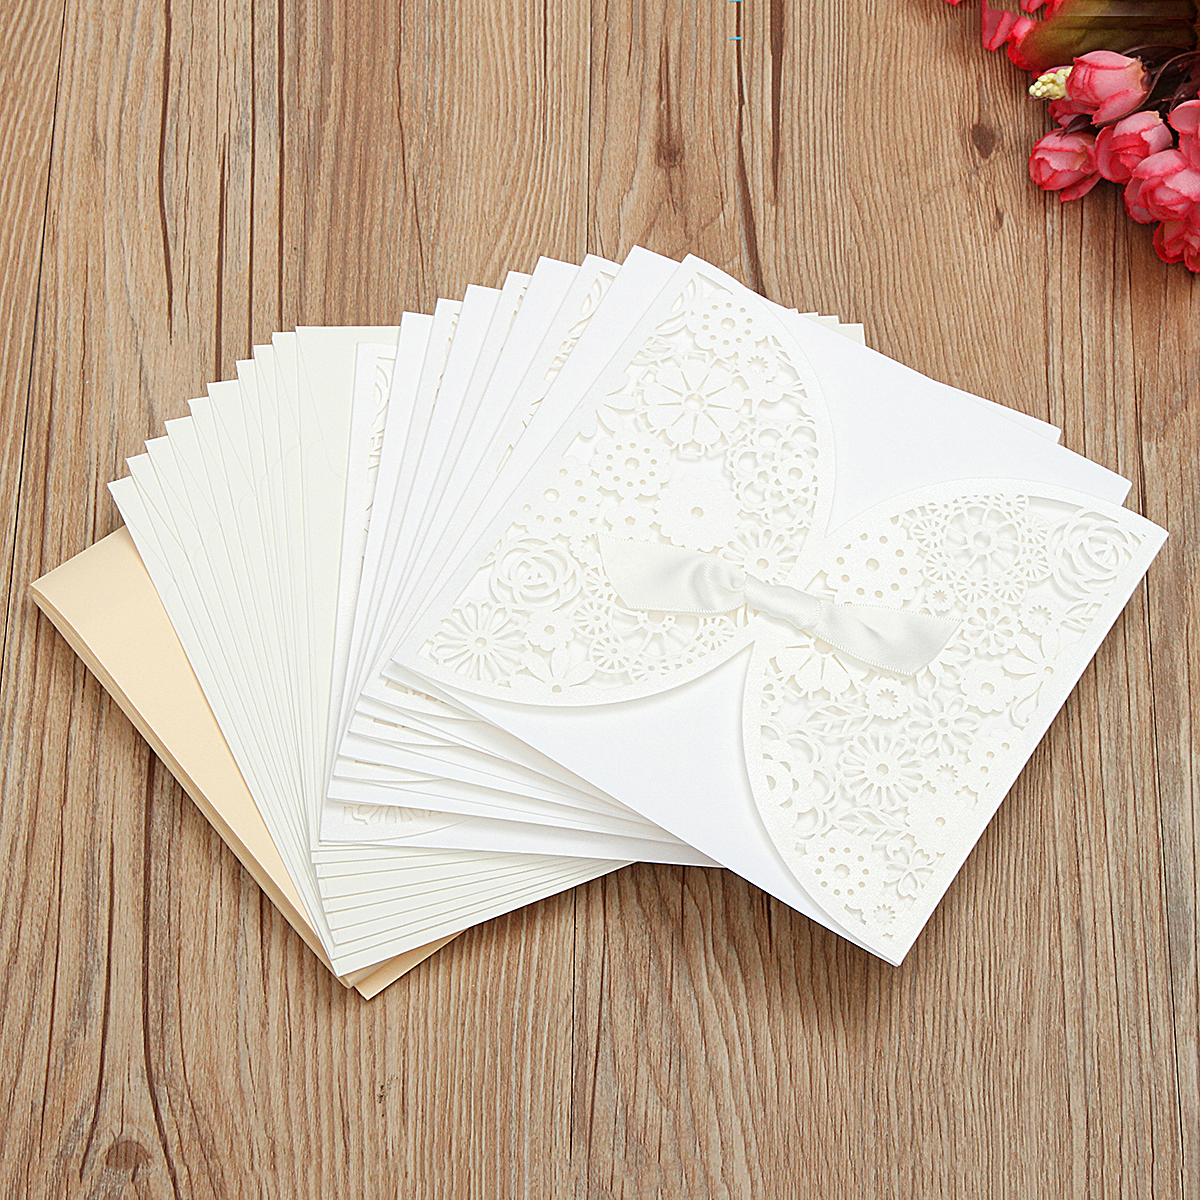 10Pcs-Laser-Cut-Hollow-Out-Bowknot-Wedding-Evening-Invitations-Cards-Personalized-Envelopes-Seals-1058581